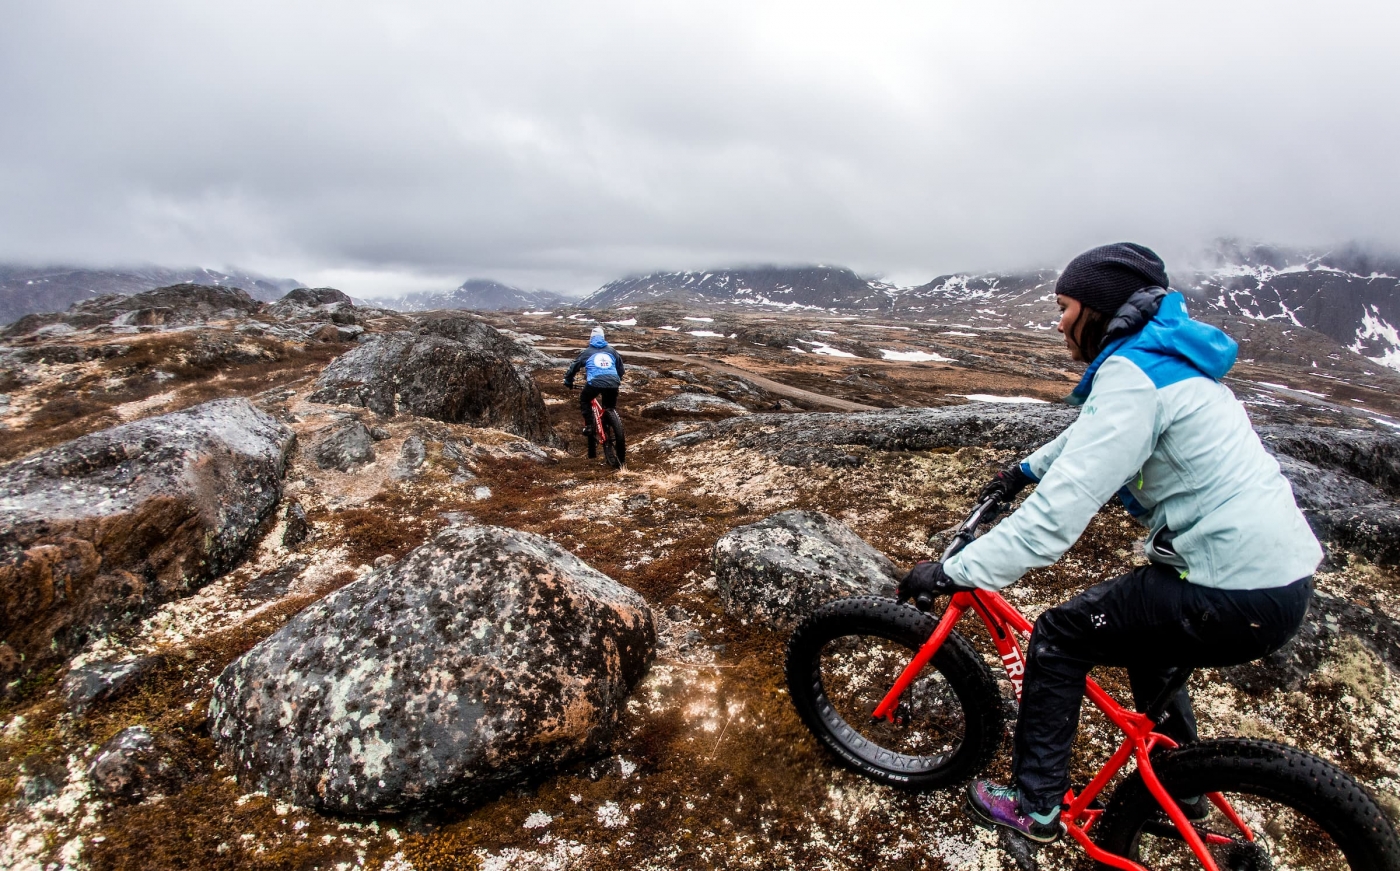 Arctic Fat biking in the Sisimiut backcountry near the Arctic Circle. Photo by Raven Eye Photography - Visit Greenland